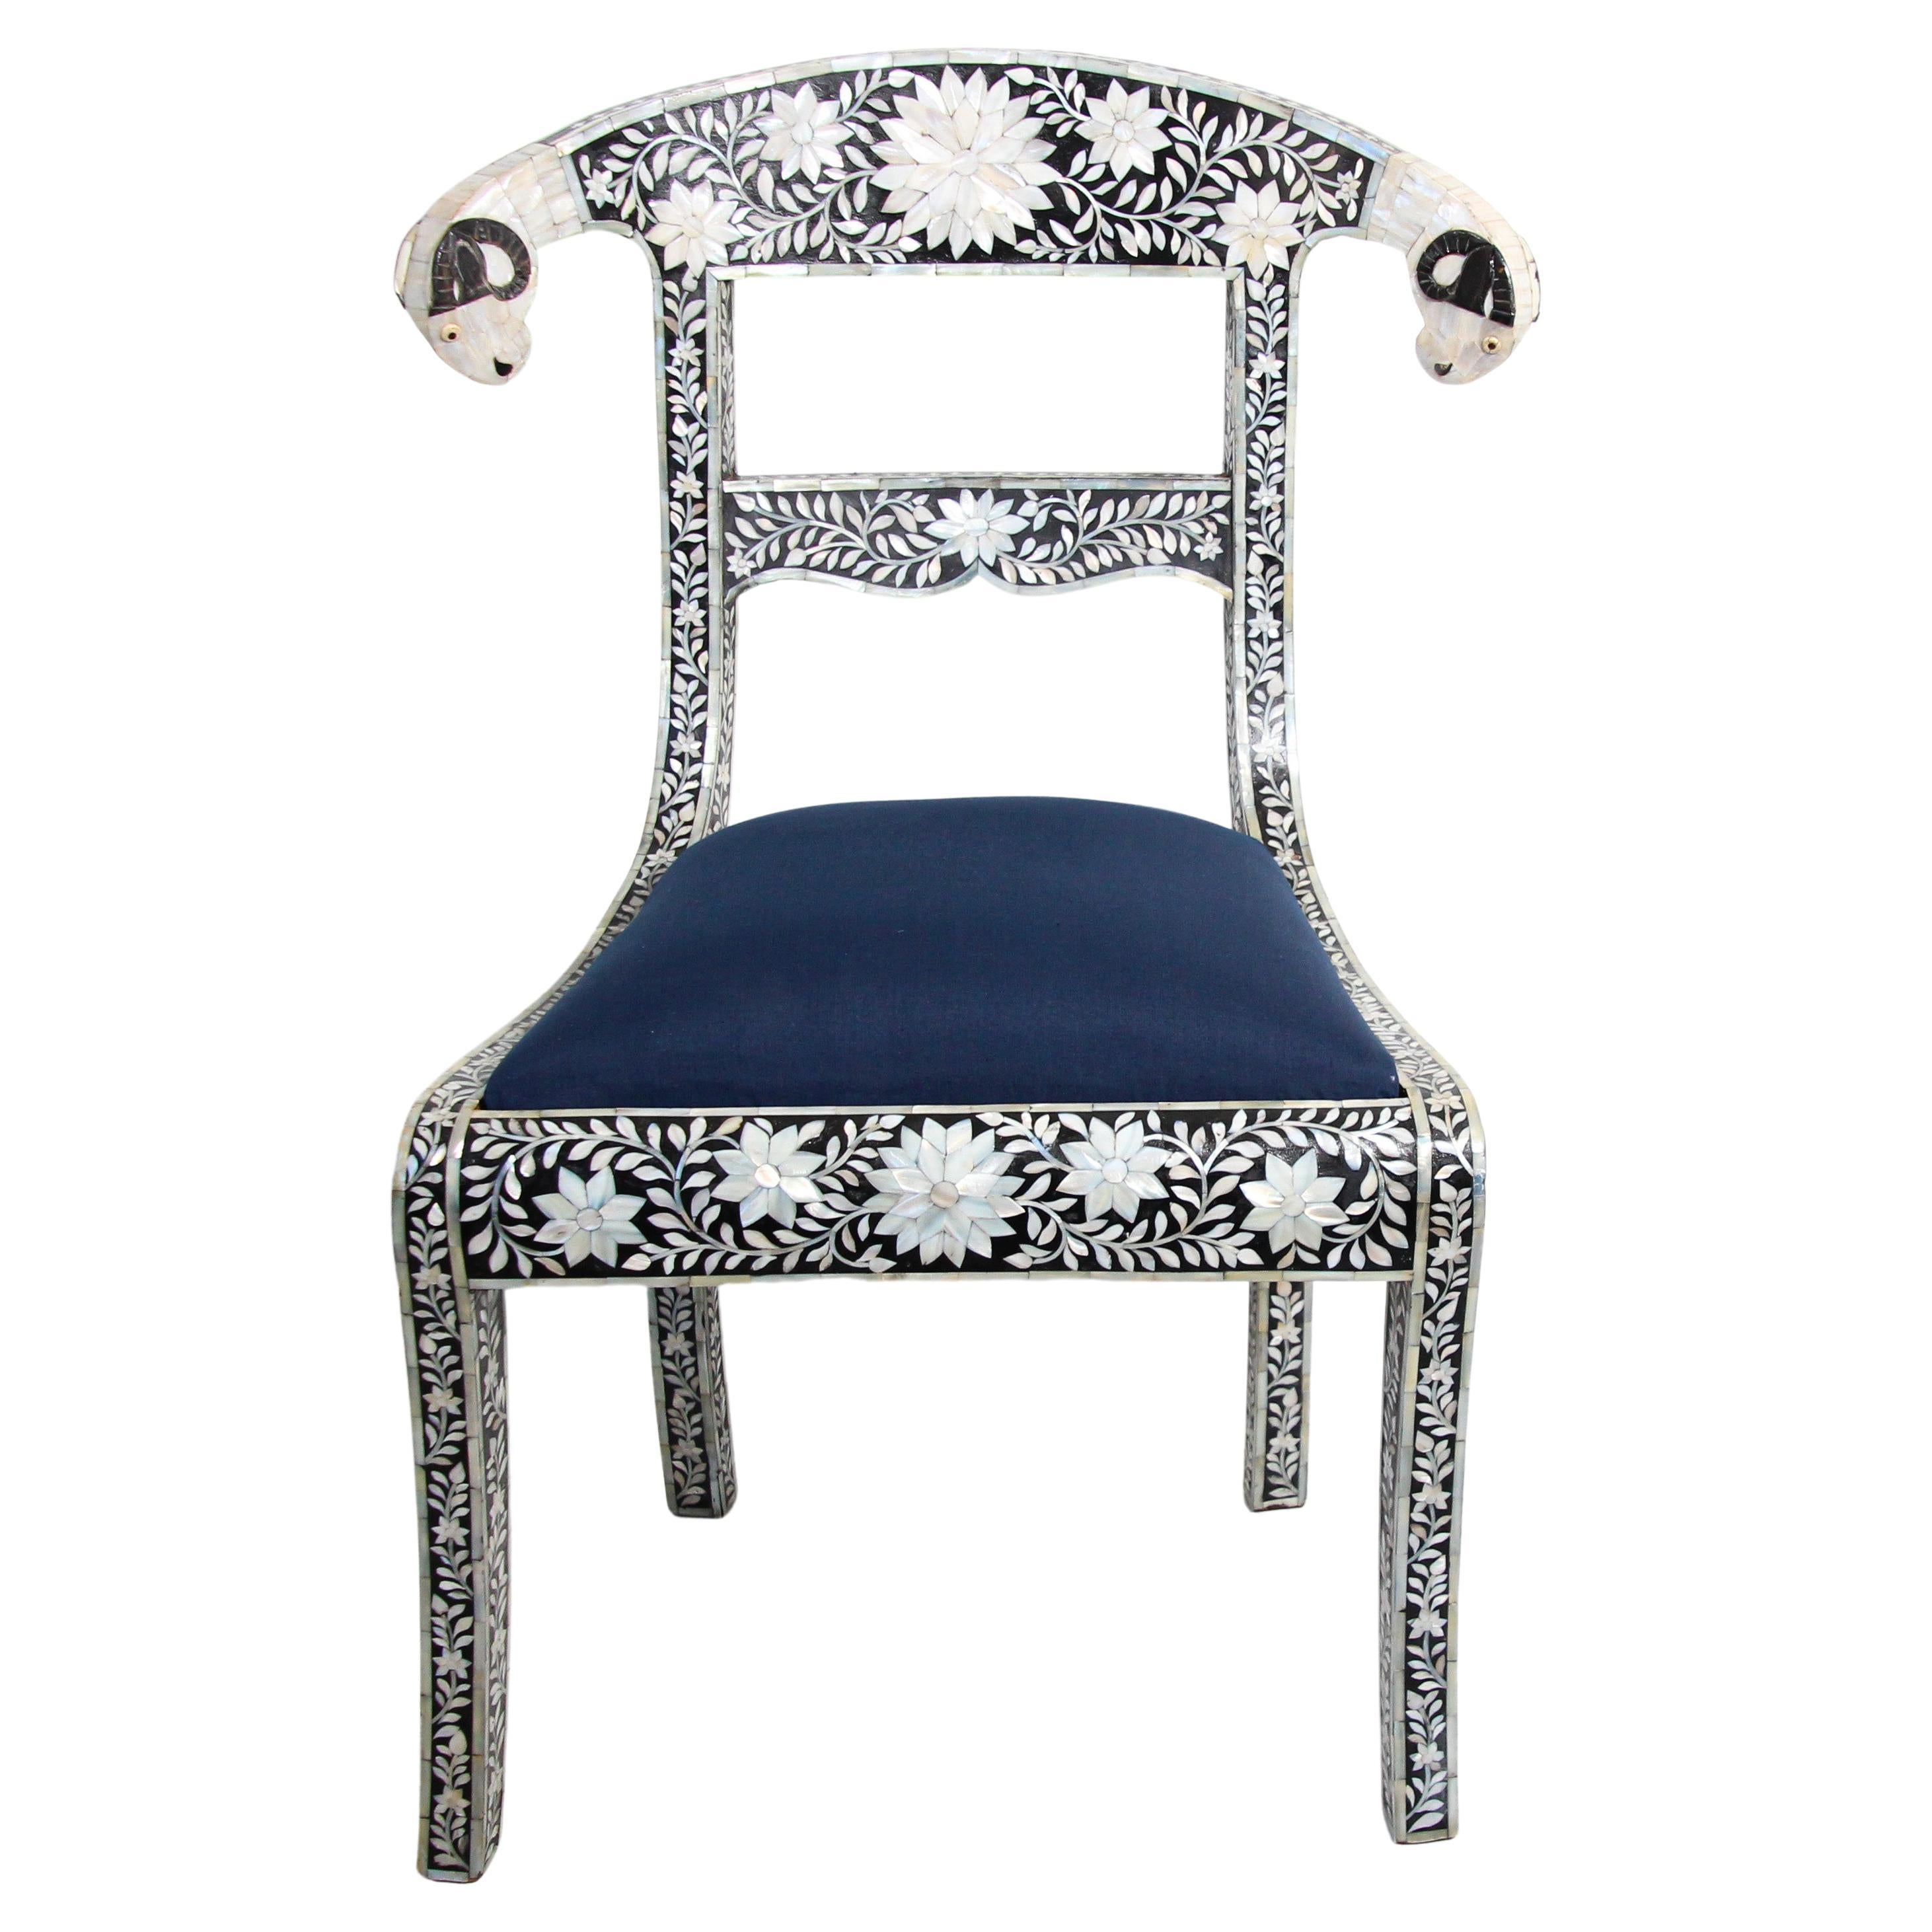 Anglo-Indian Mughal black and white mother of pearl inlaid dining chair with ram head detail.
Mother-of-pearl Klismos style chair, this stunning chair feature a wooden frame inlaid with intricate and detailed floral design in white mother of pearl